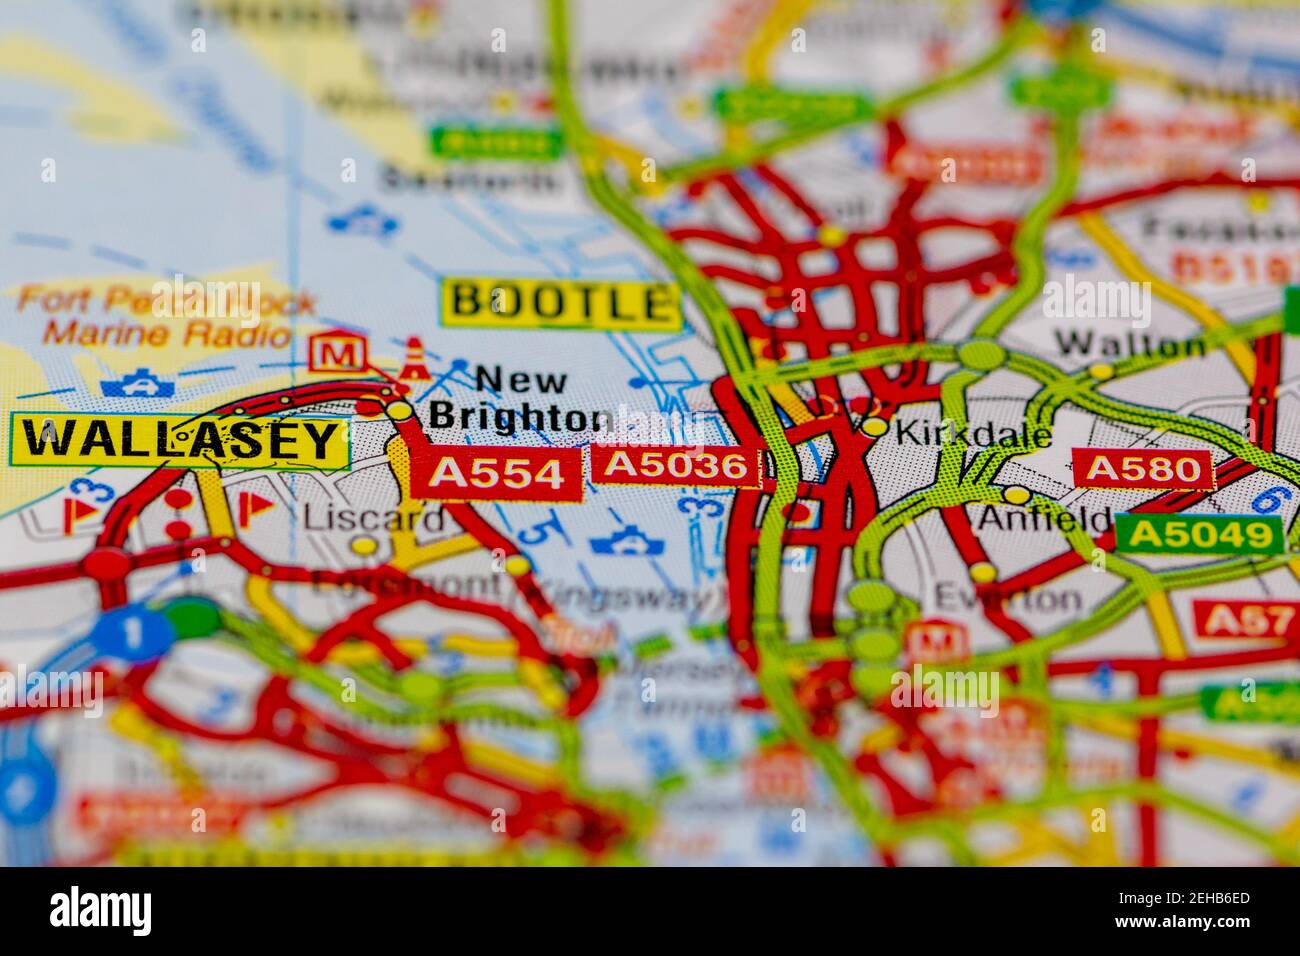 Wallasey and surrounding areas shown on a road map or Geography map Stock Photo